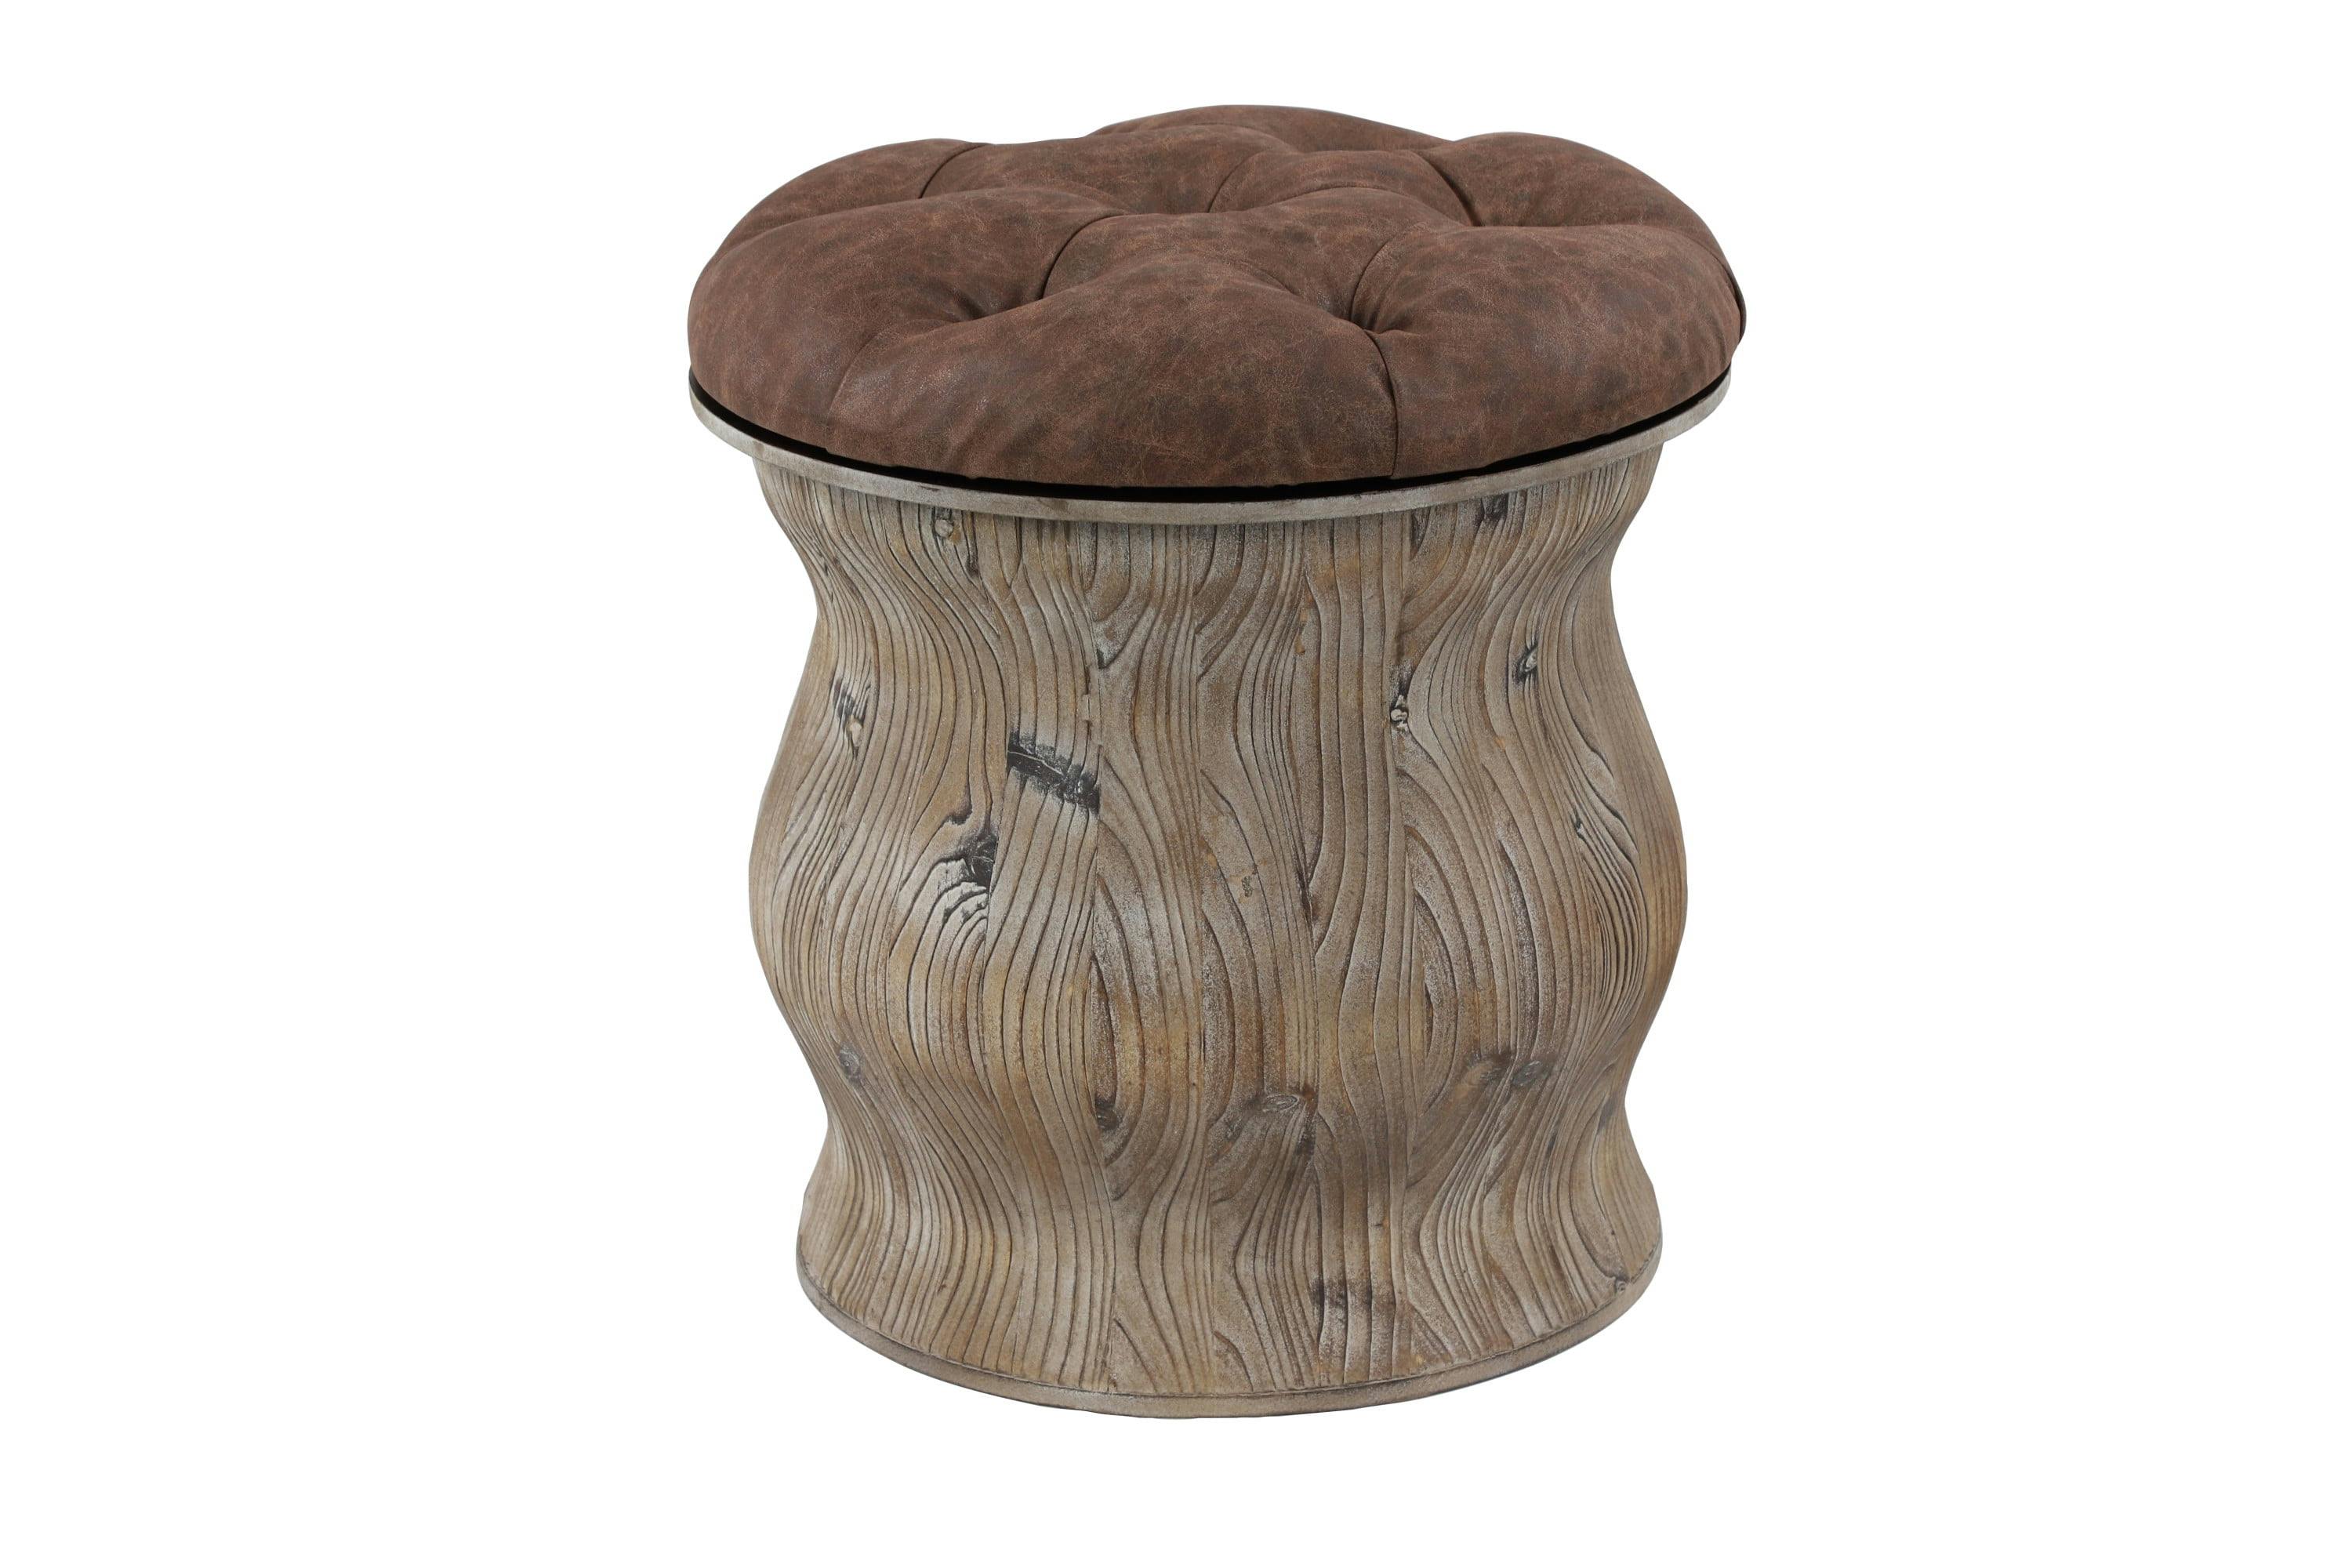 Distressed Brown Leather Tufted Round Storage Ottoman